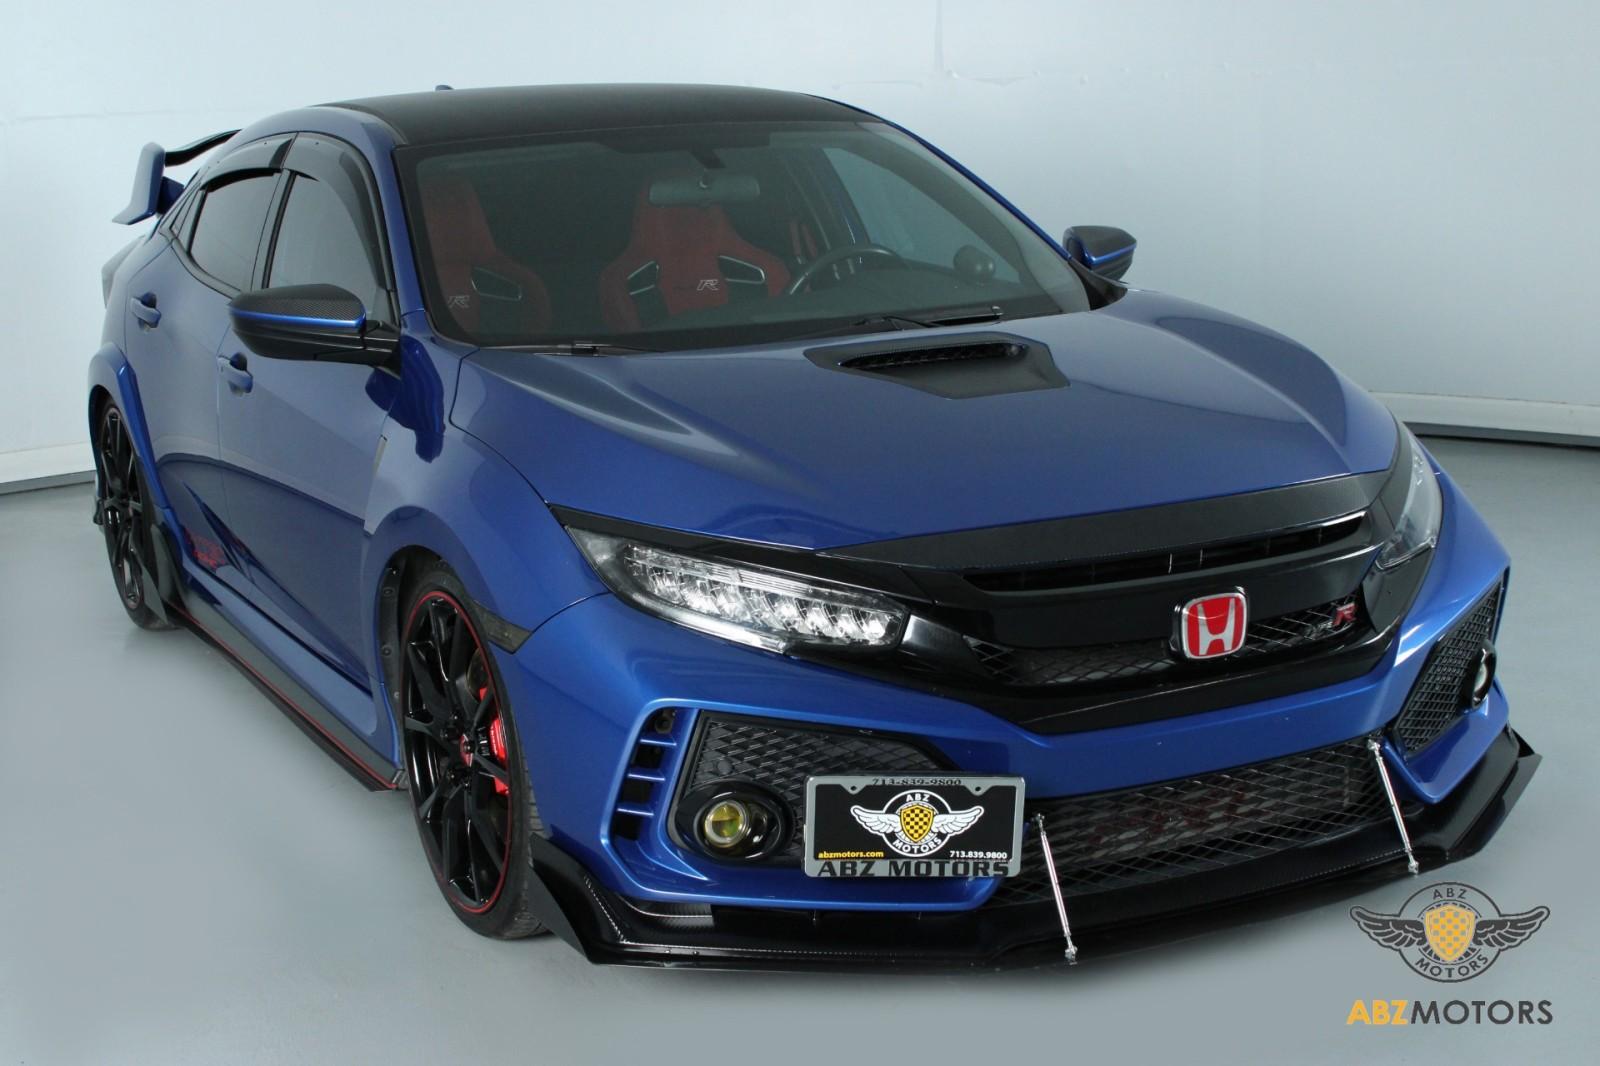 Used Honda Civic Type-R Touring for Sale